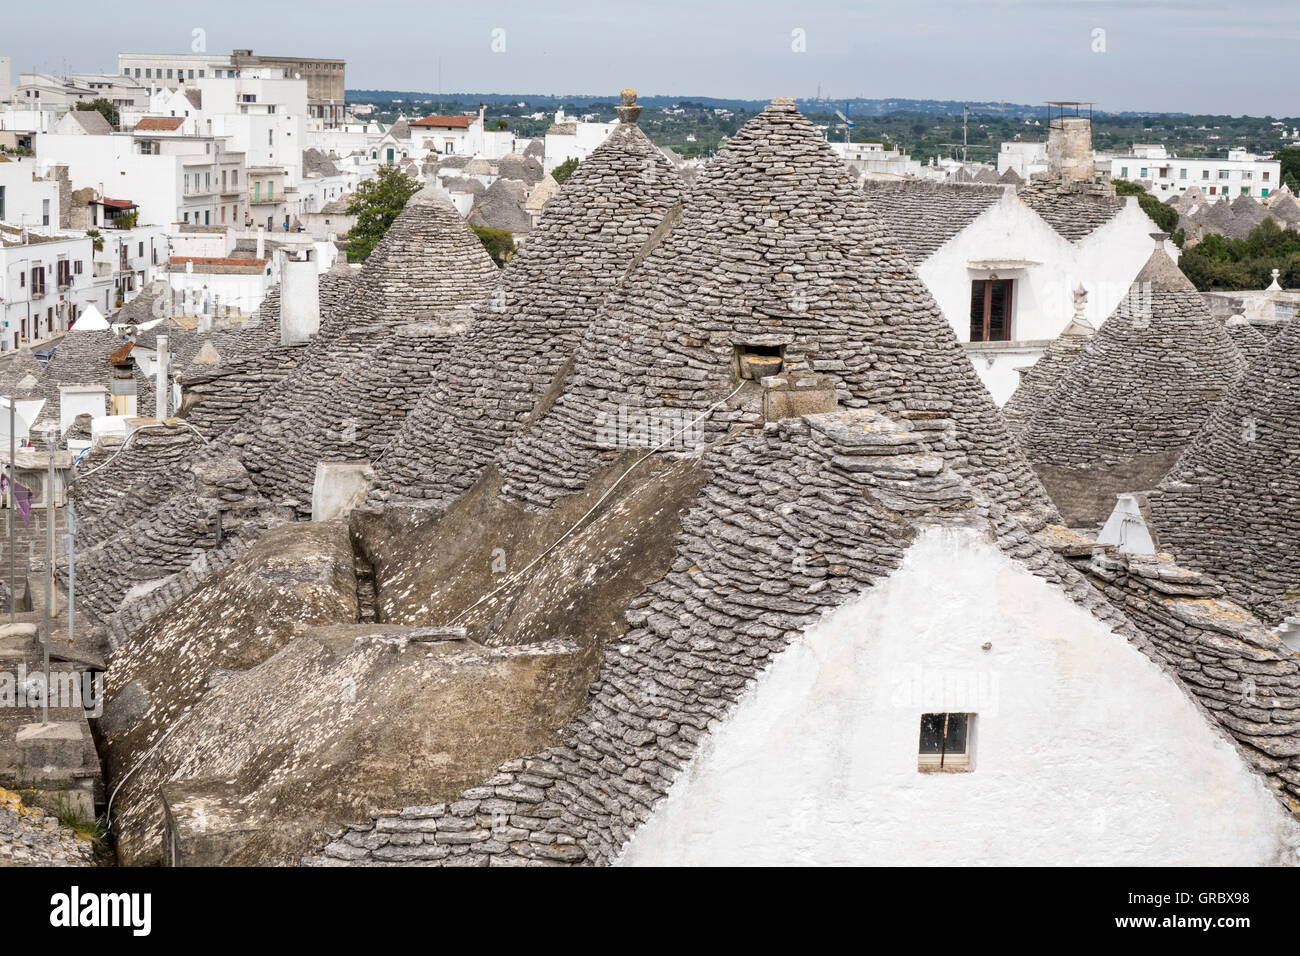 Trulli In The Foreground, Modern Houses In The Background, Alberobello, Apulia, Italy Stock Photo